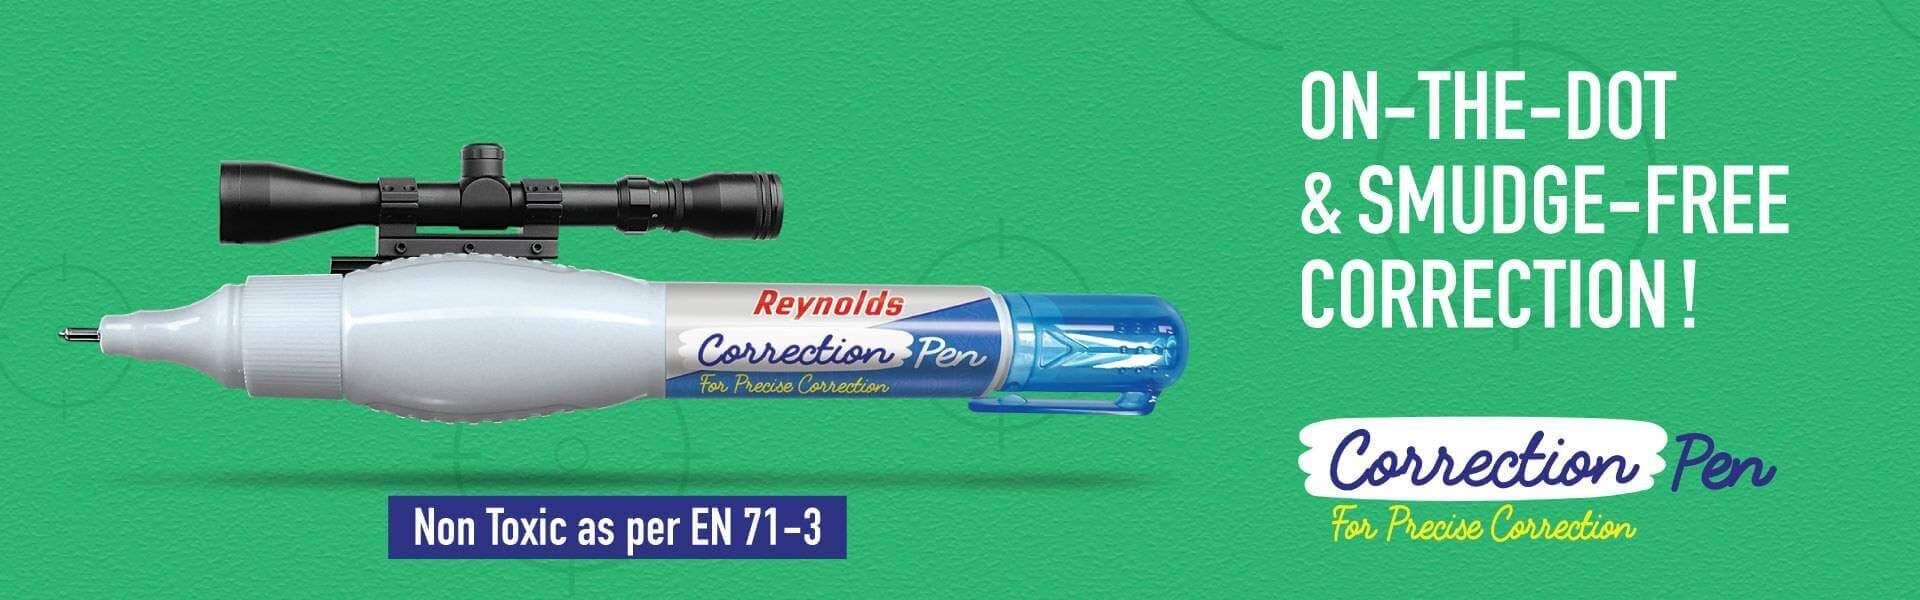 Reynolds-Lisiting-Page-Correction-Page-Correction-Pen-Banner-New